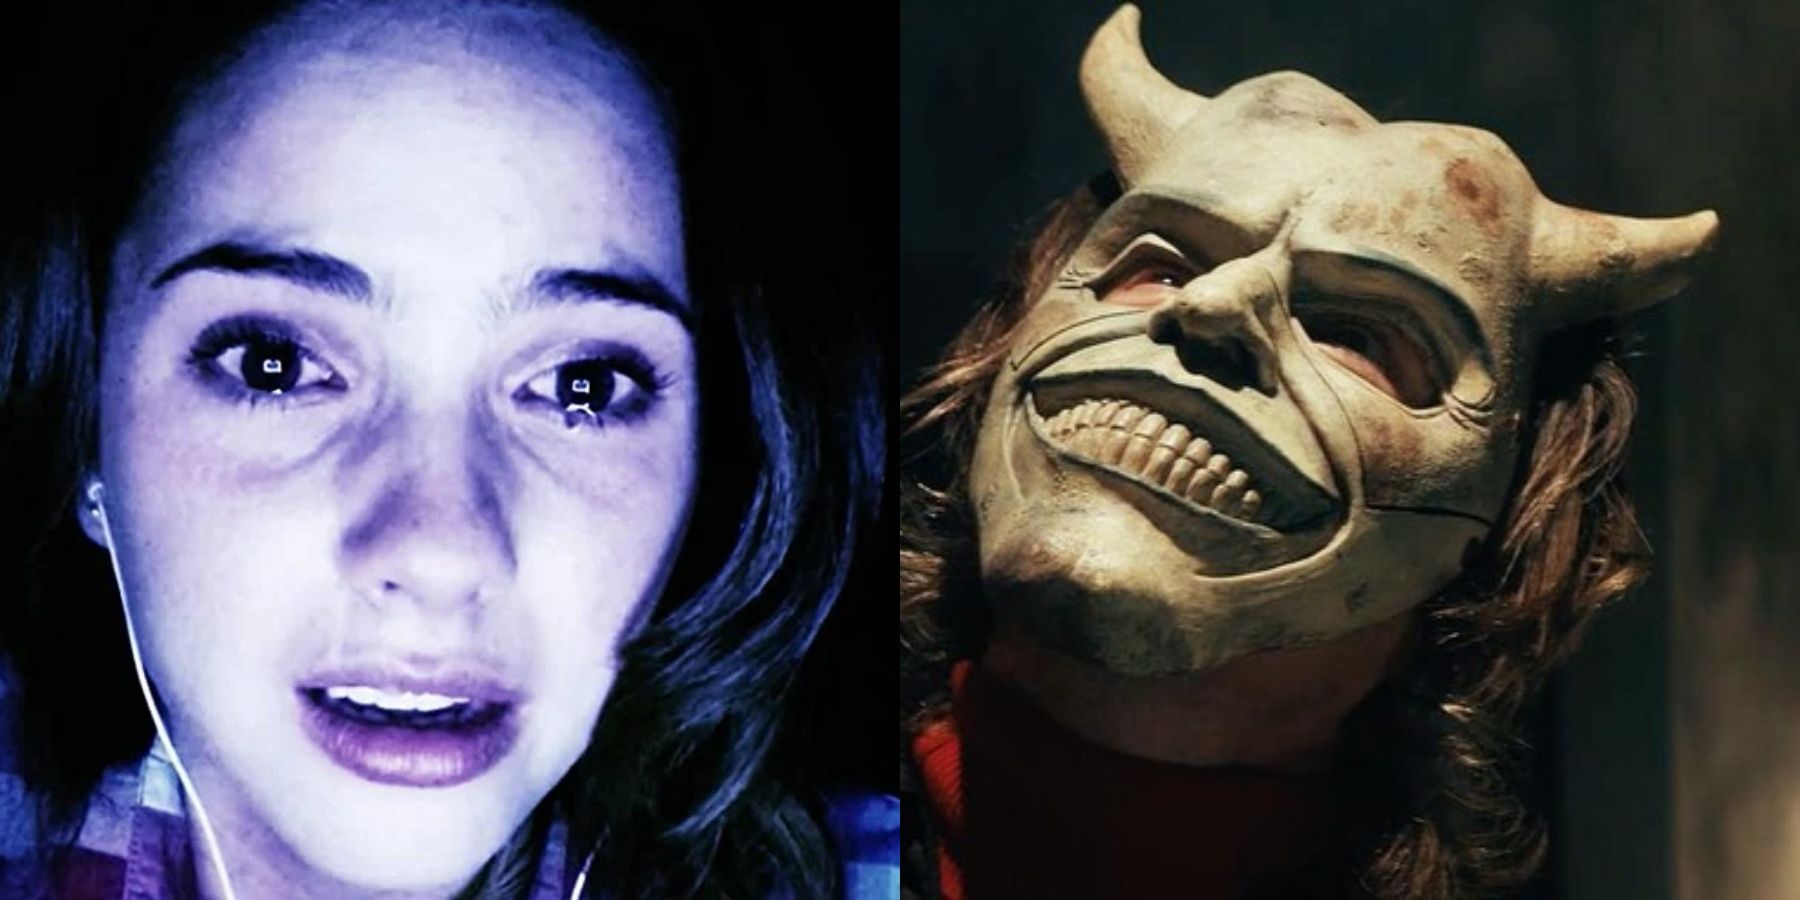 Split image of Blaire in Unfriended and The Grabber in The Black Phone